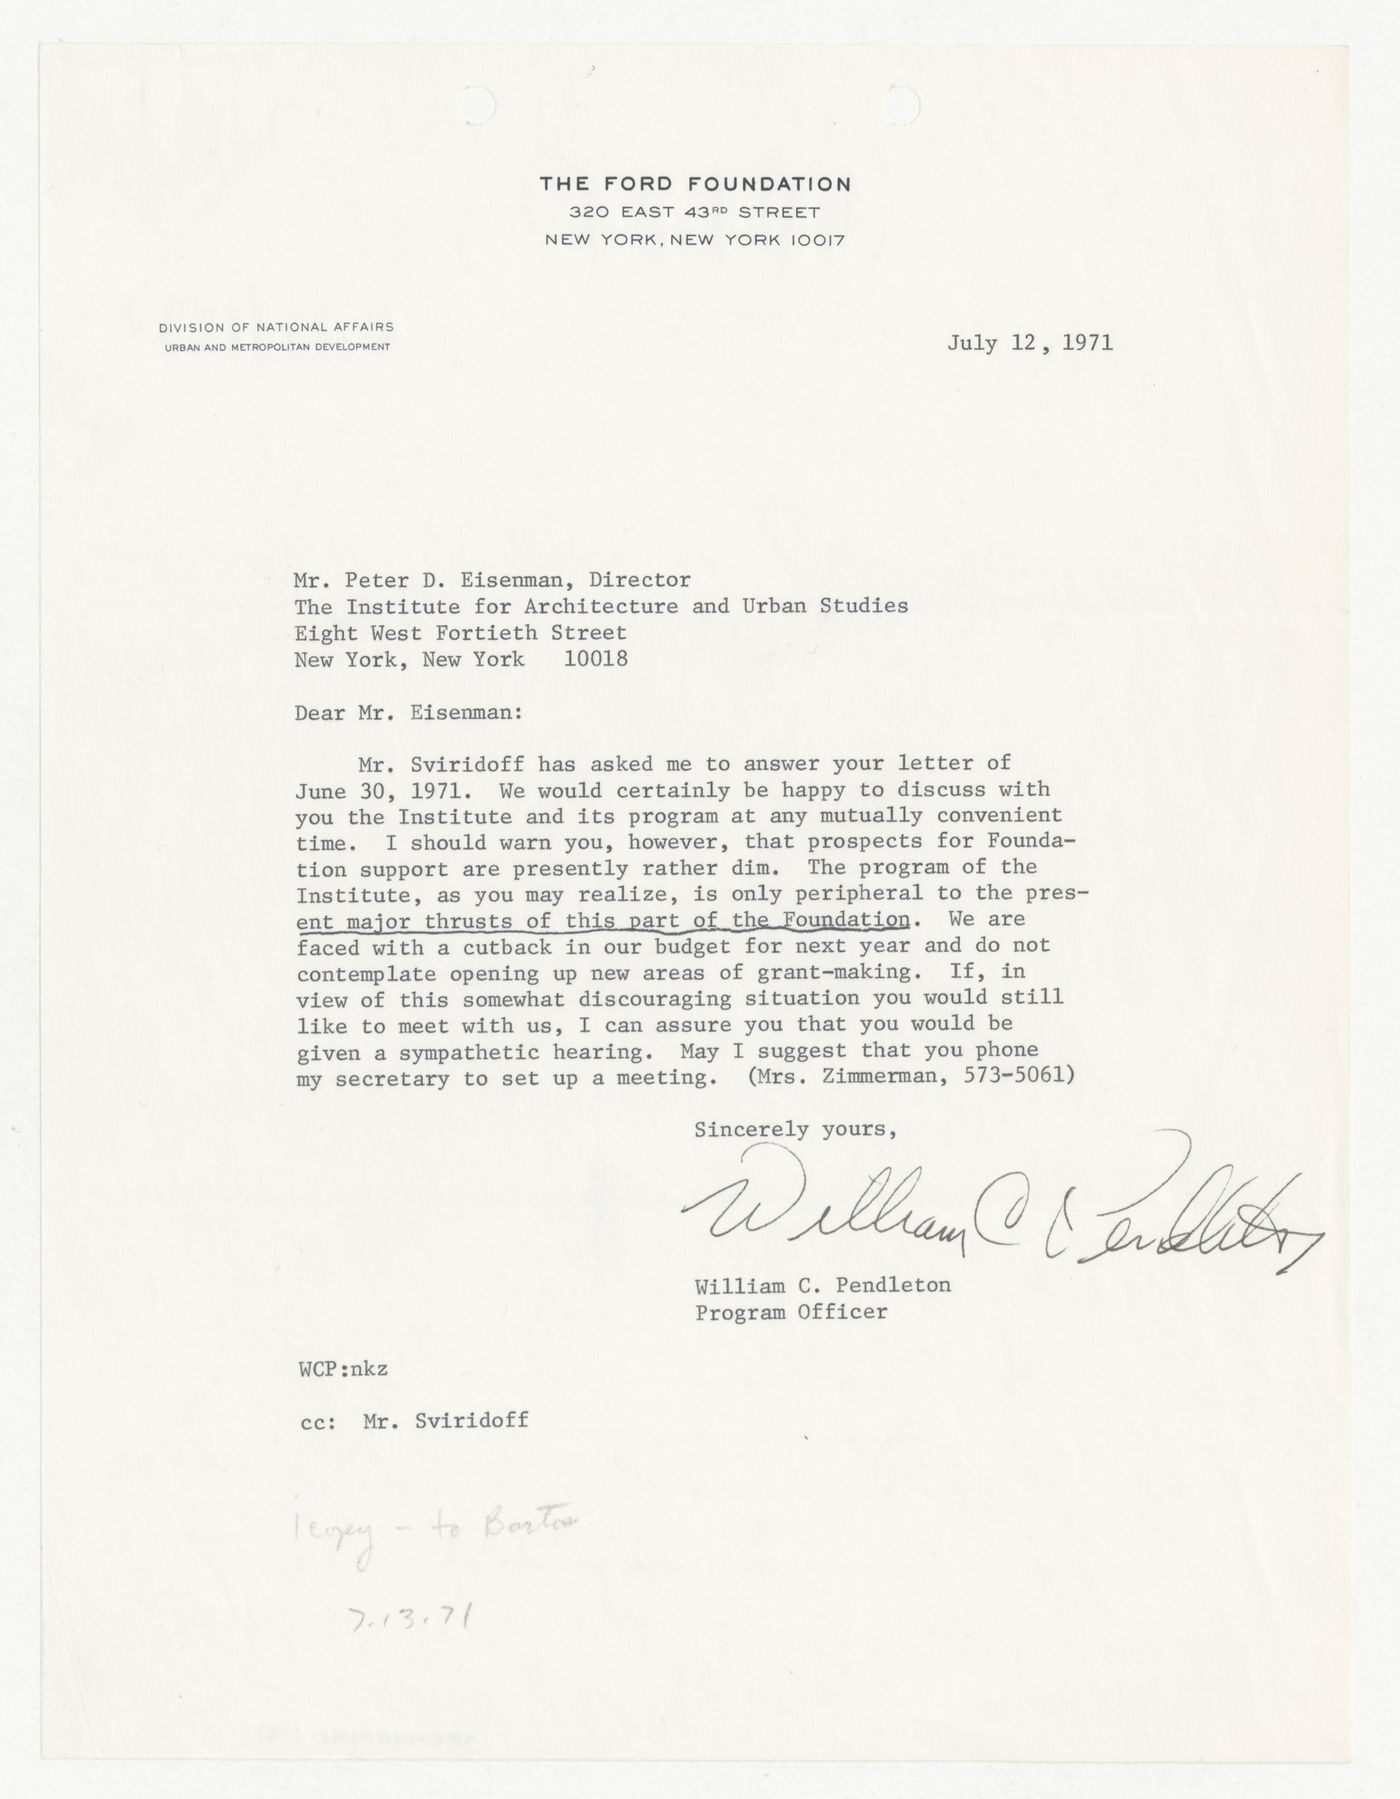 Letter from William C. Pendleton to Peter D. Eisenman with attached copy of letter from Eisenman requesting a donation